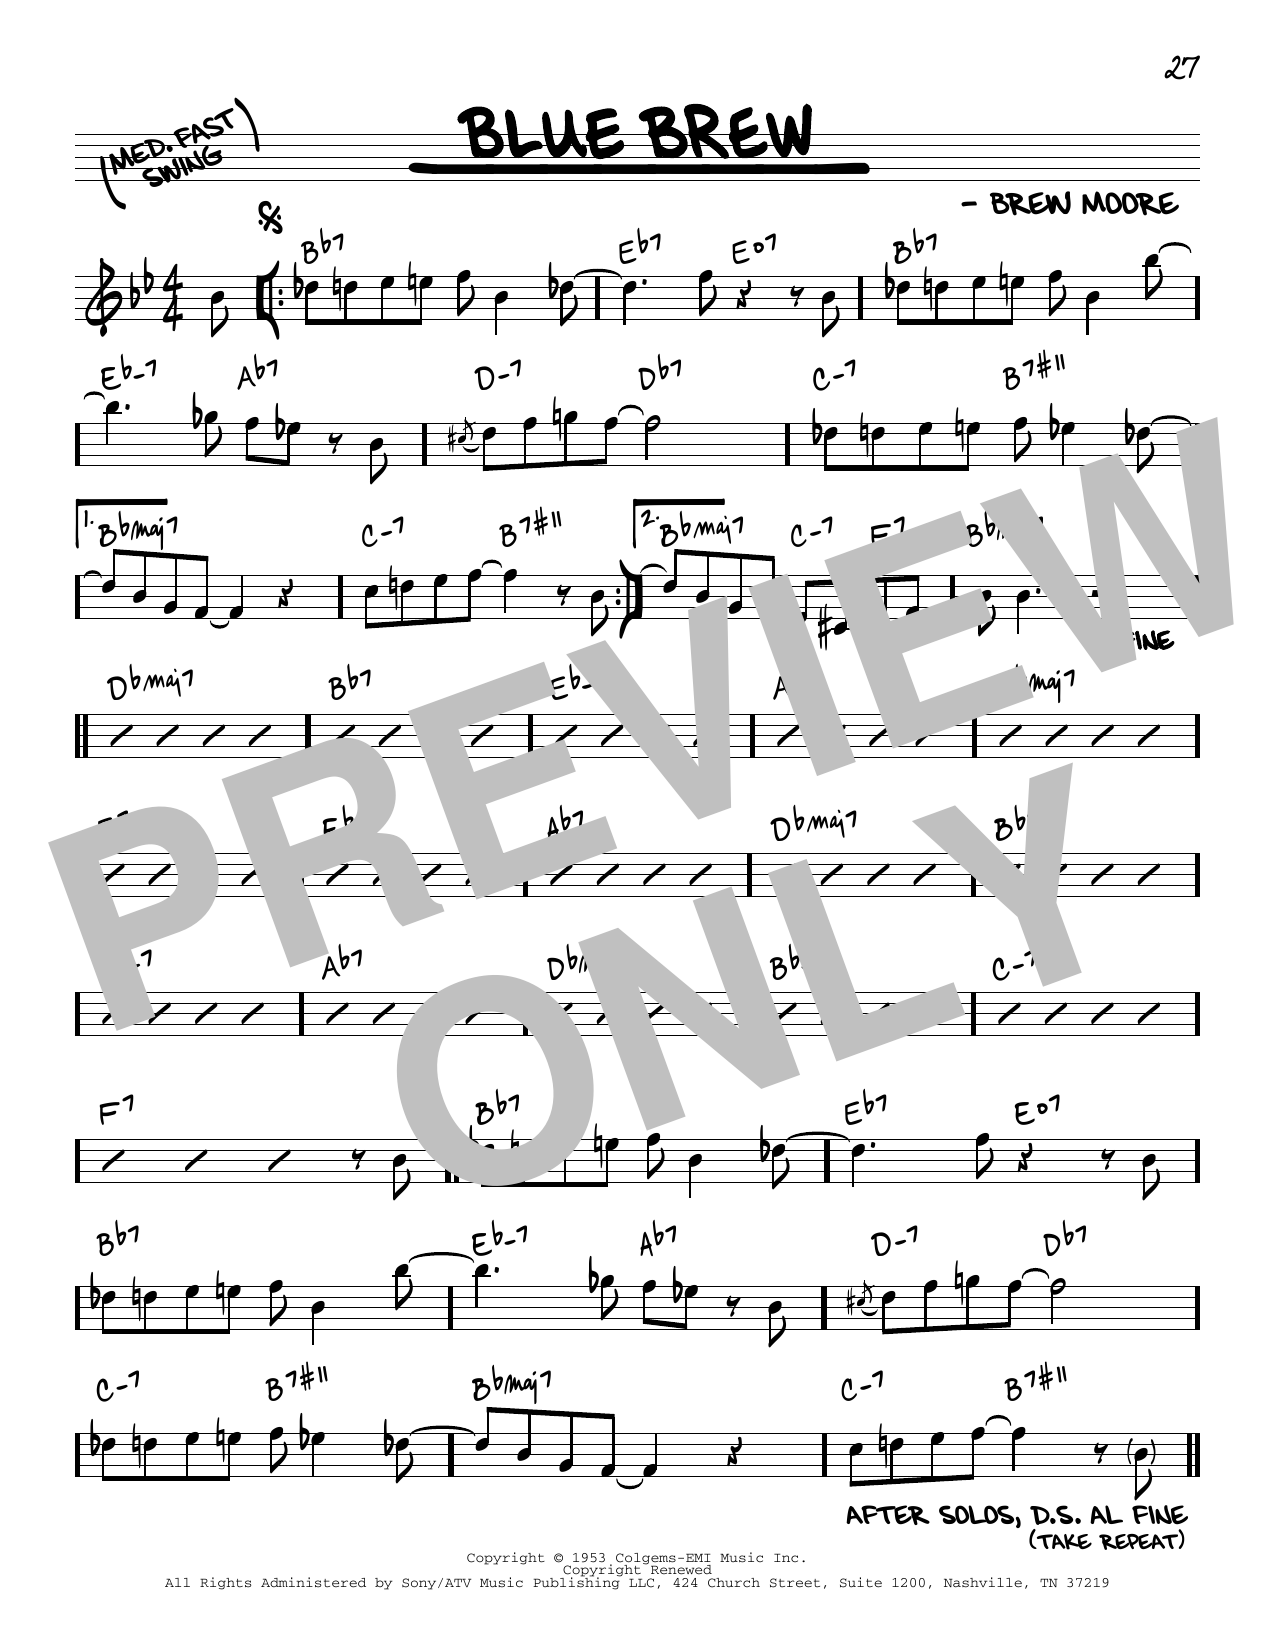 Download Brew Moore Blue Brew Sheet Music